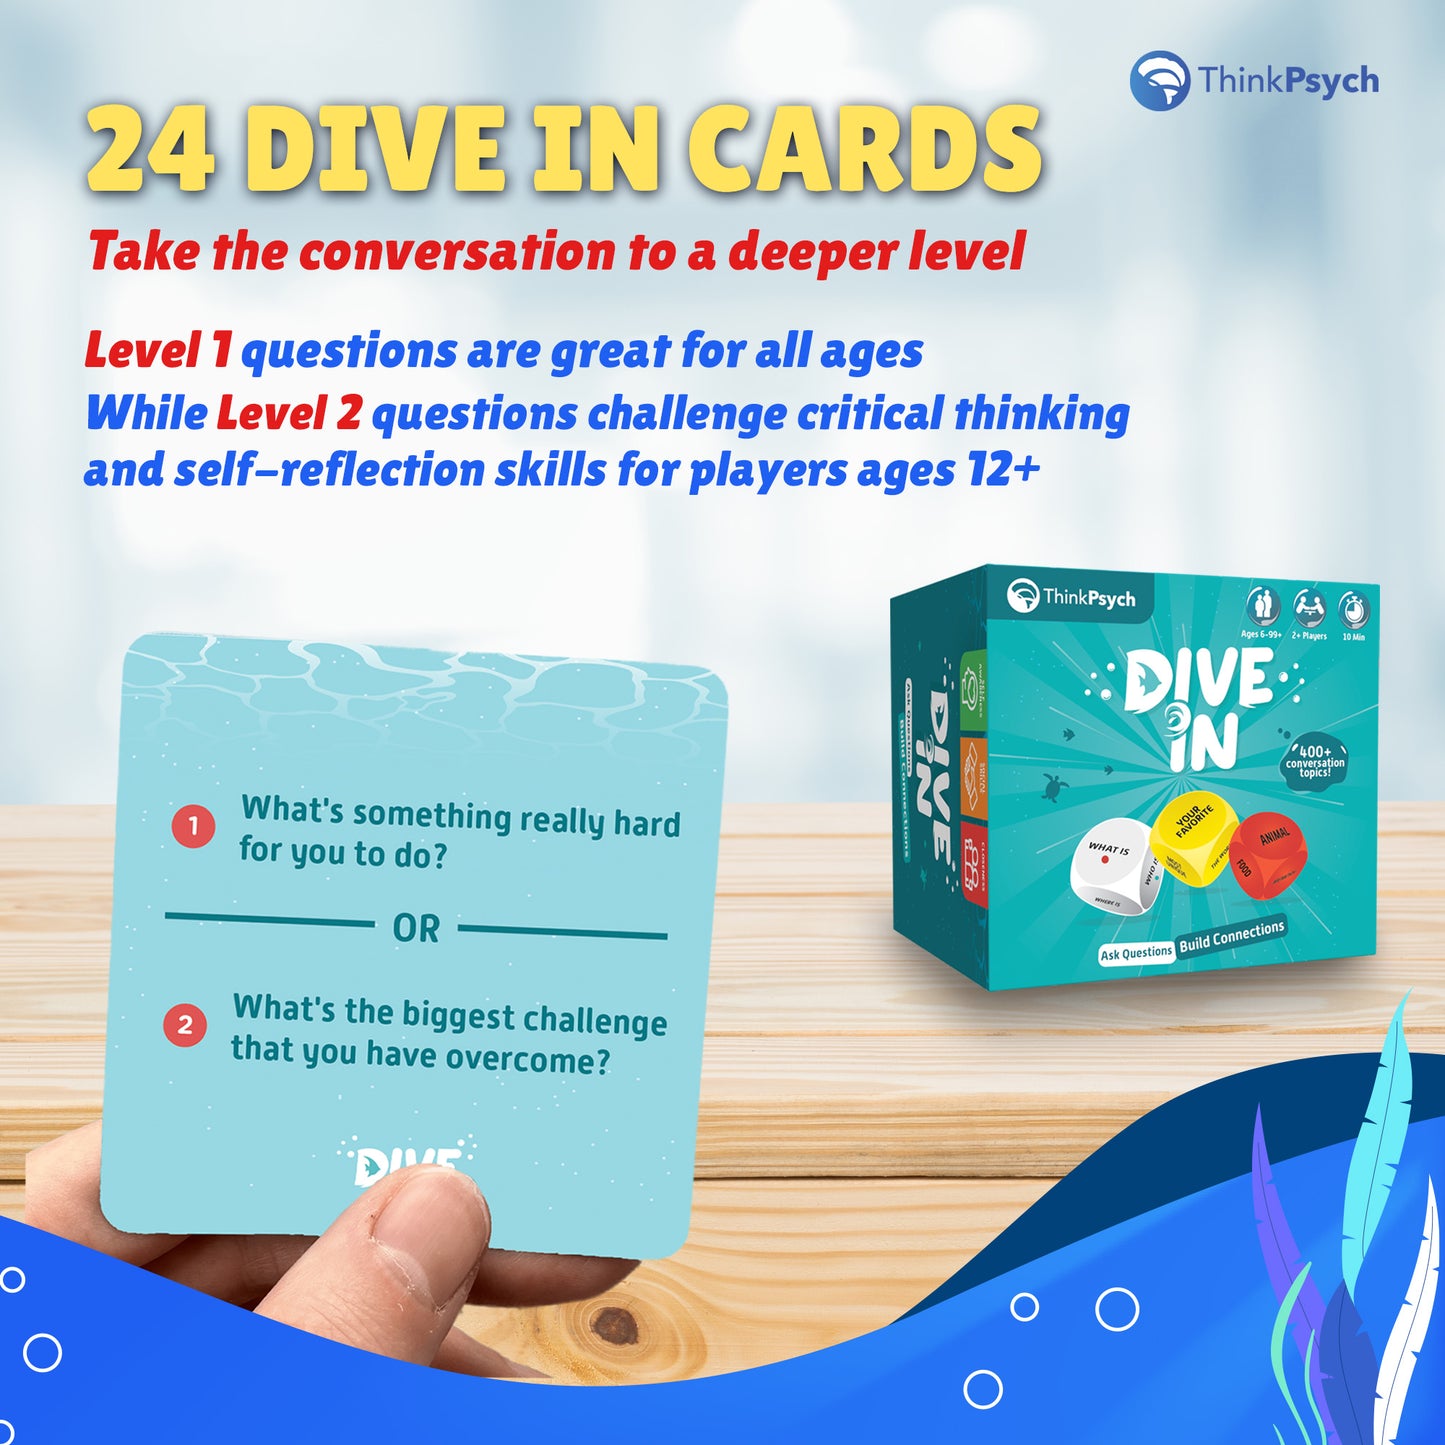 Dive In: Ask Questions Build Connections